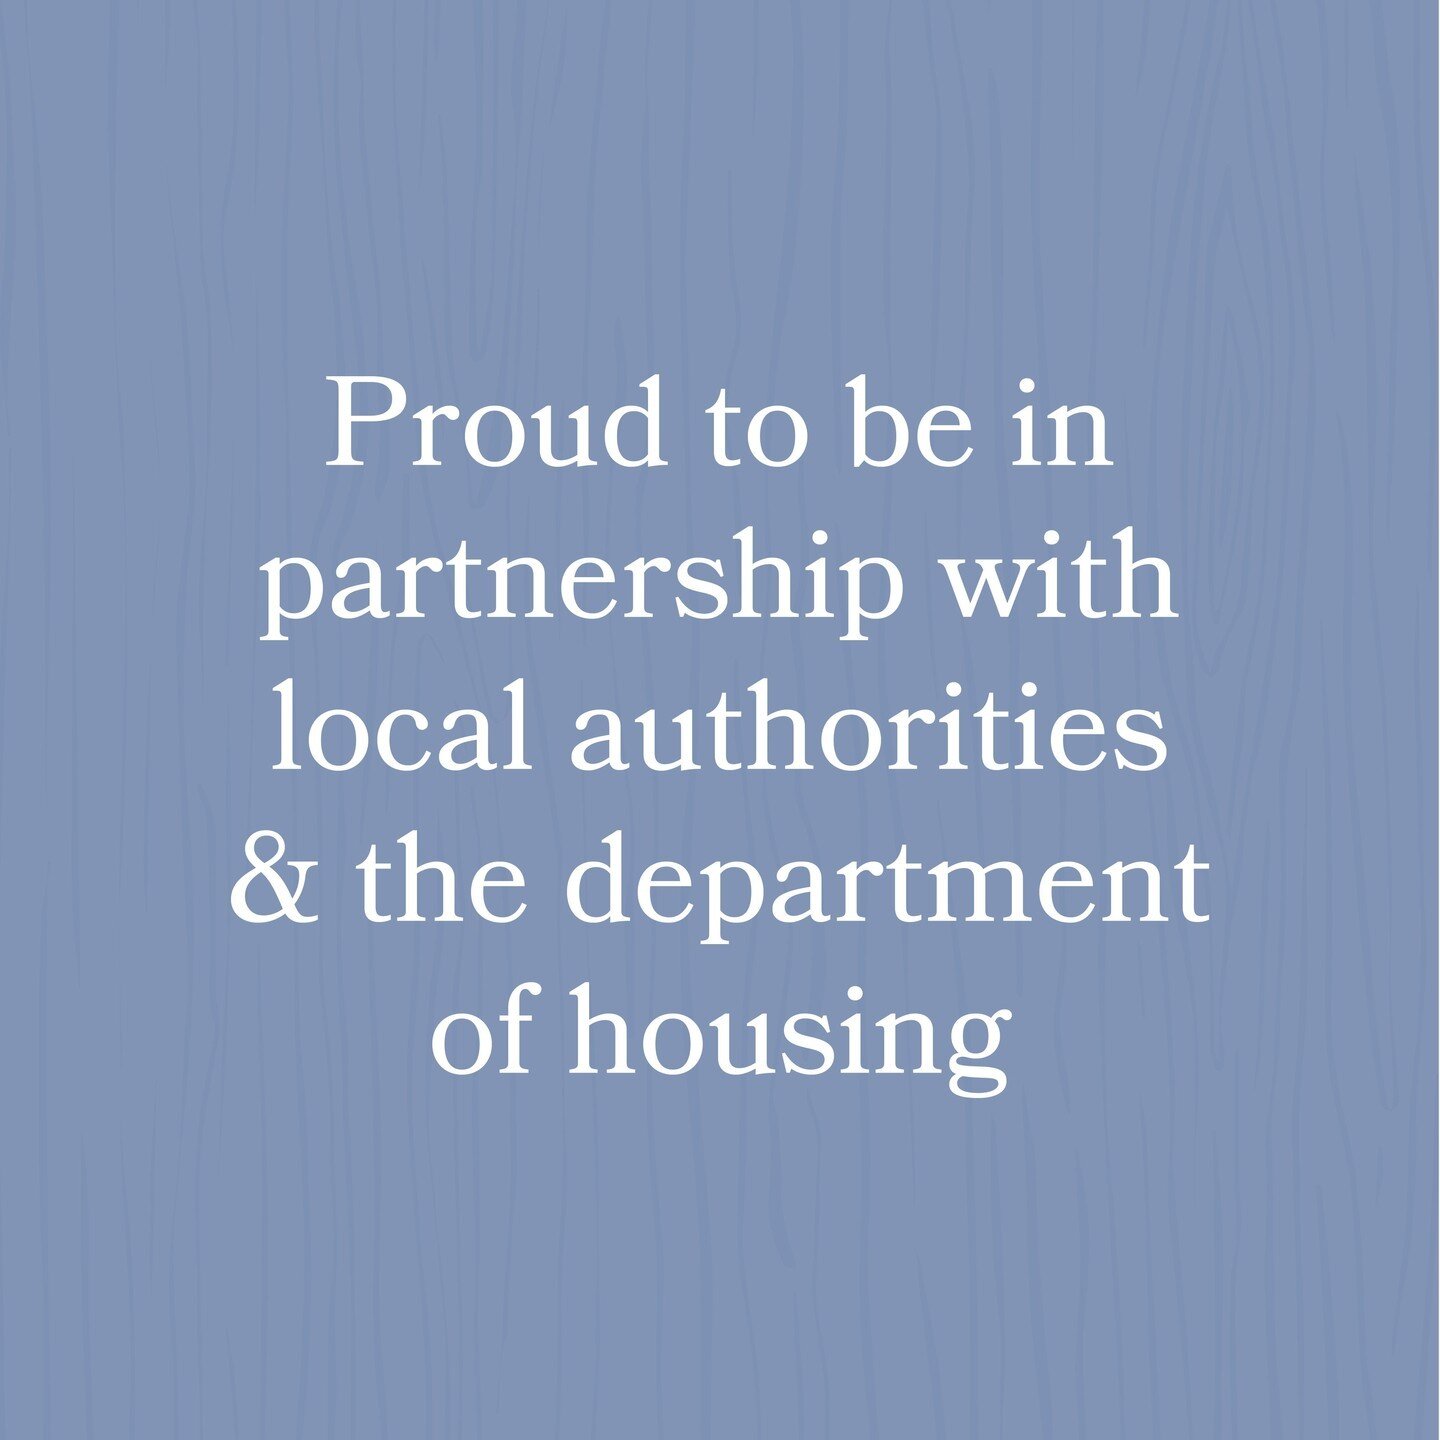 Introducing our partners and sponsors

Their support has helped bring our model to fruition and create real impact. We are continually grateful for their belief in the OCualann model 💚 

#&Oacute;Cualann 
#Partnerships
#AffordableHousing
#BuildingBr